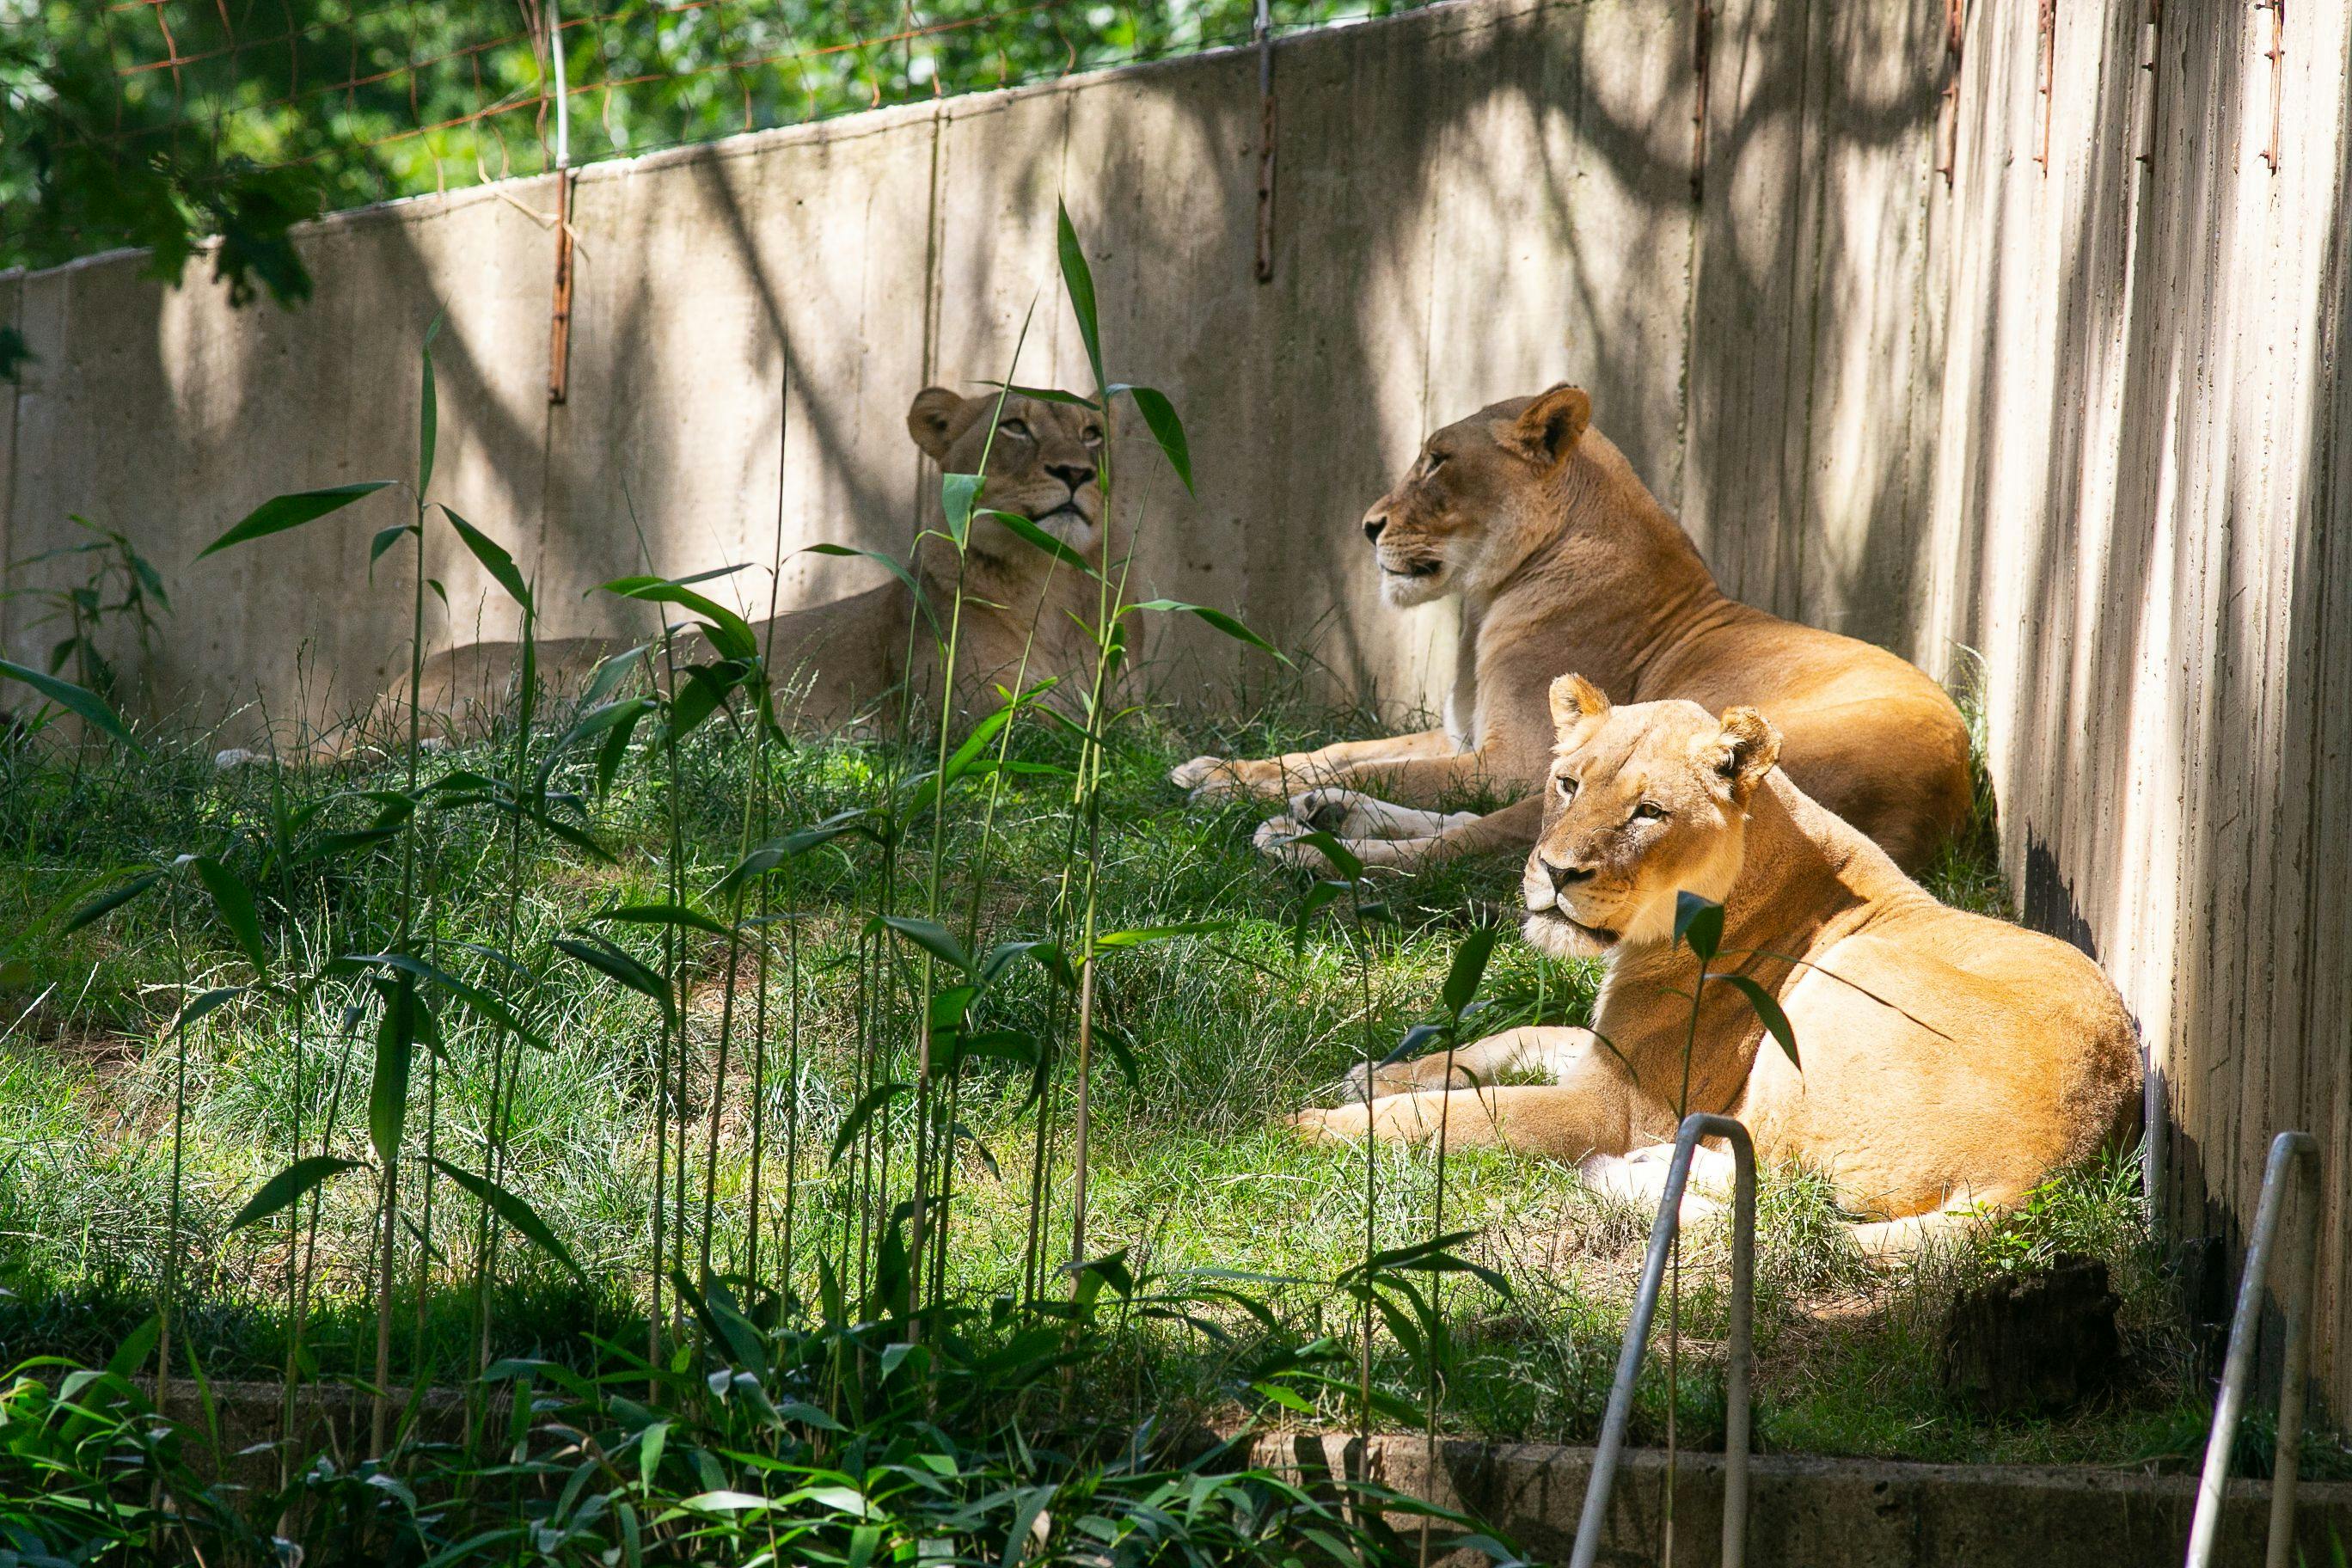 Smithsonian’s National Zoo lions and tigers recover after testing presumptive positive for COVID-19